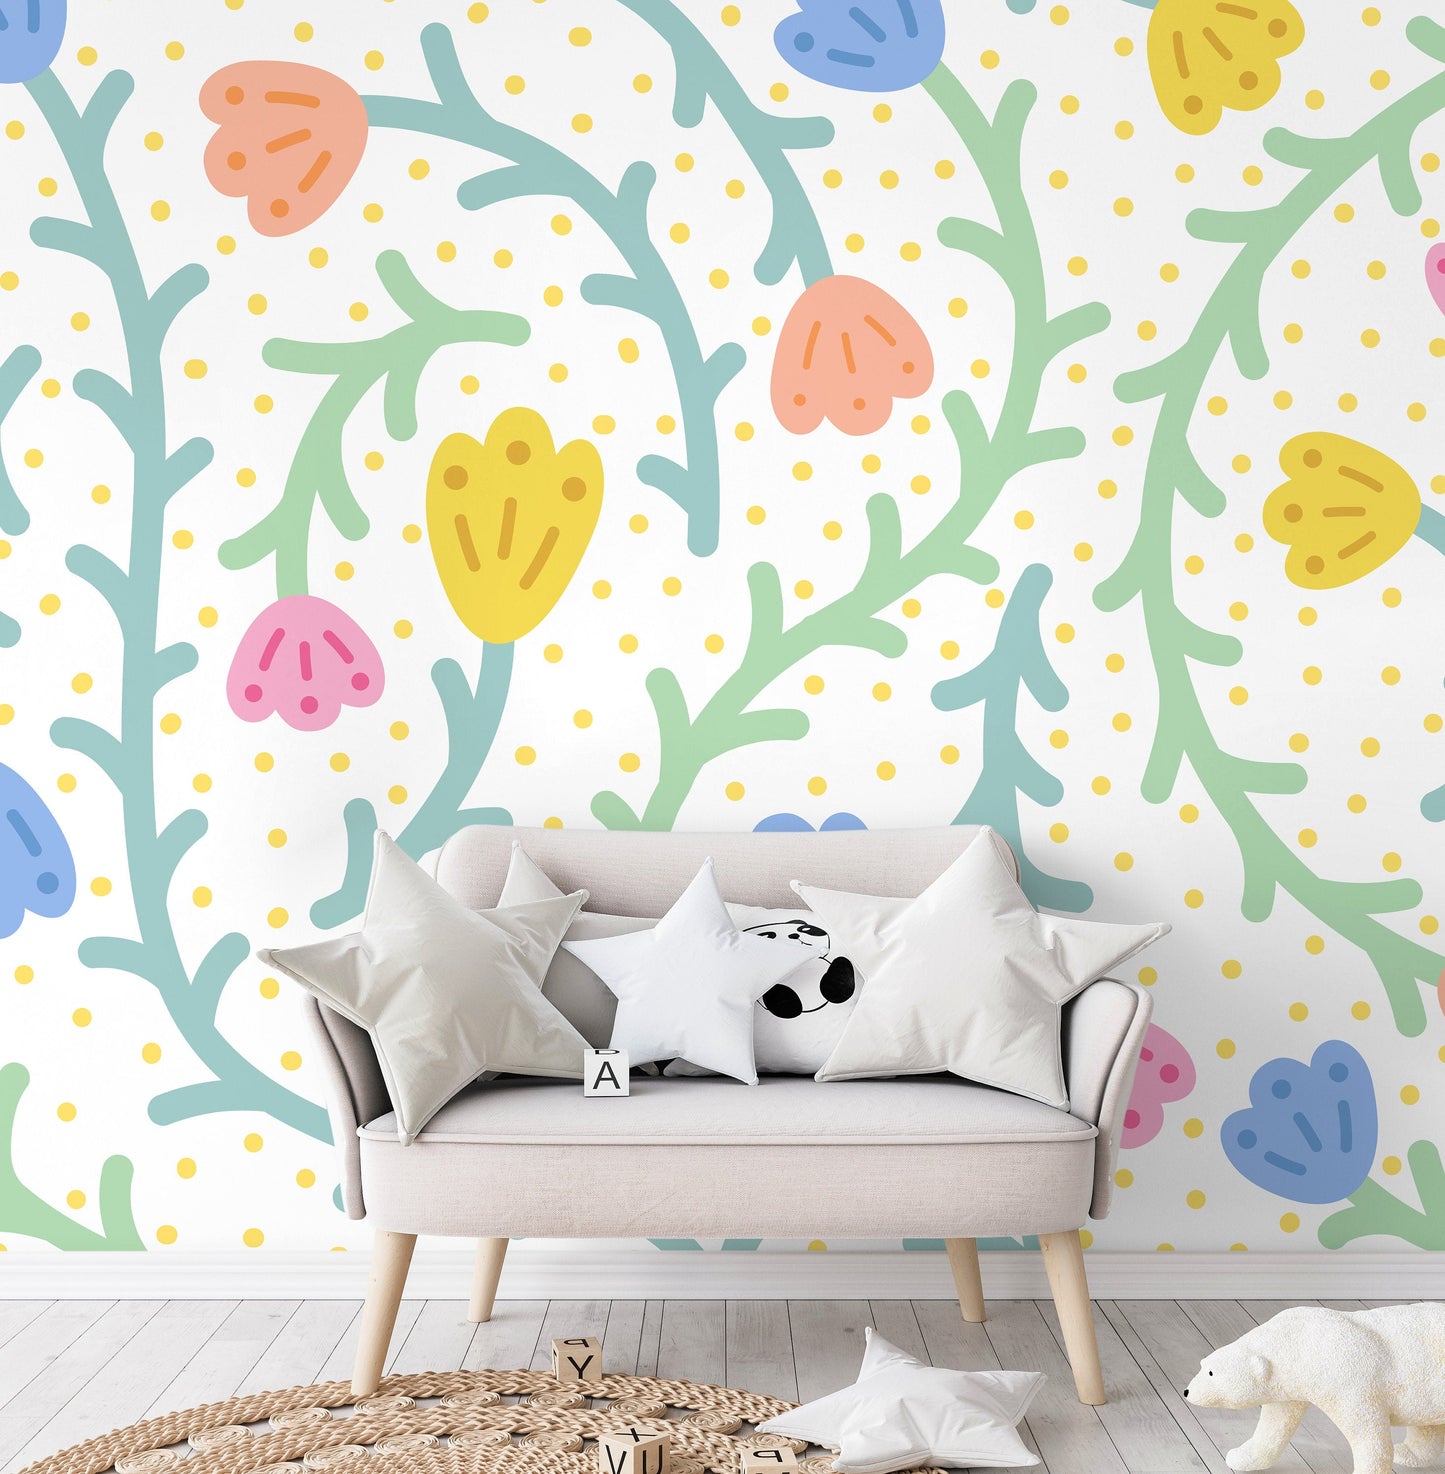 Wallpaper Peel and Stick Wallpaper Removable Wallpaper Home Decor Wall Art Wall Decor Room Decor / Colorful Floral Kid Wallpaper - C474